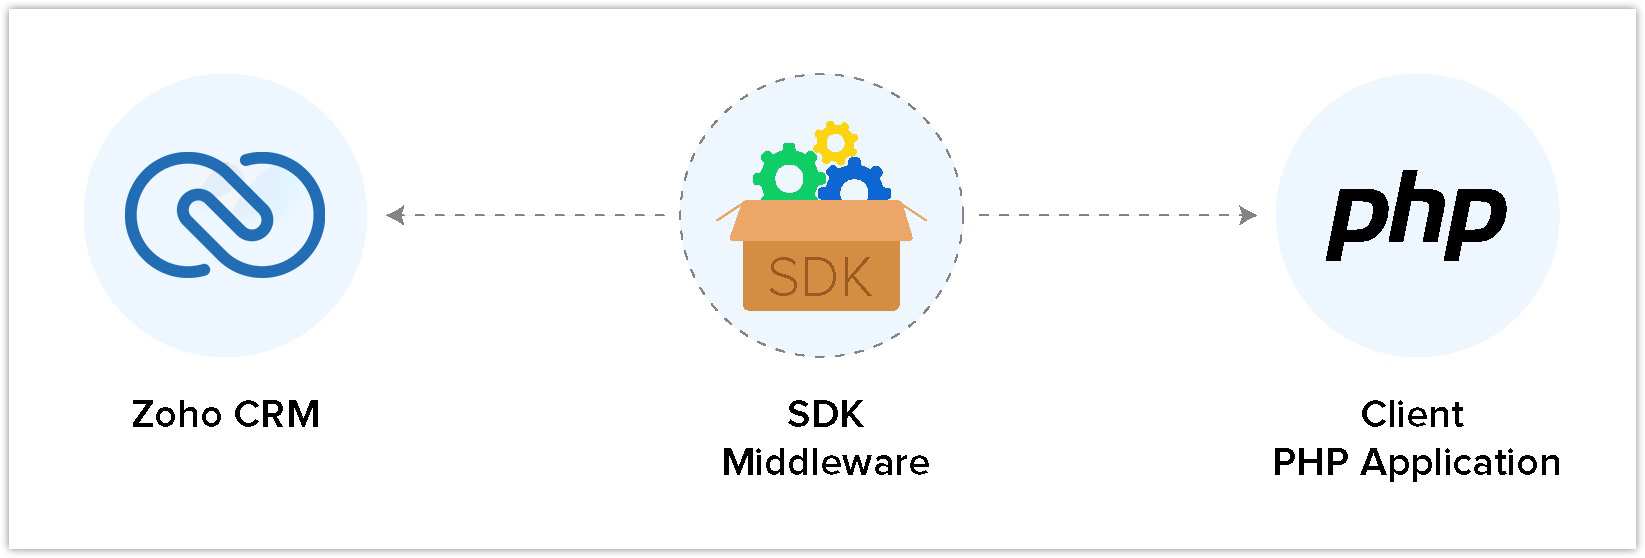 PHP SDK middleware image